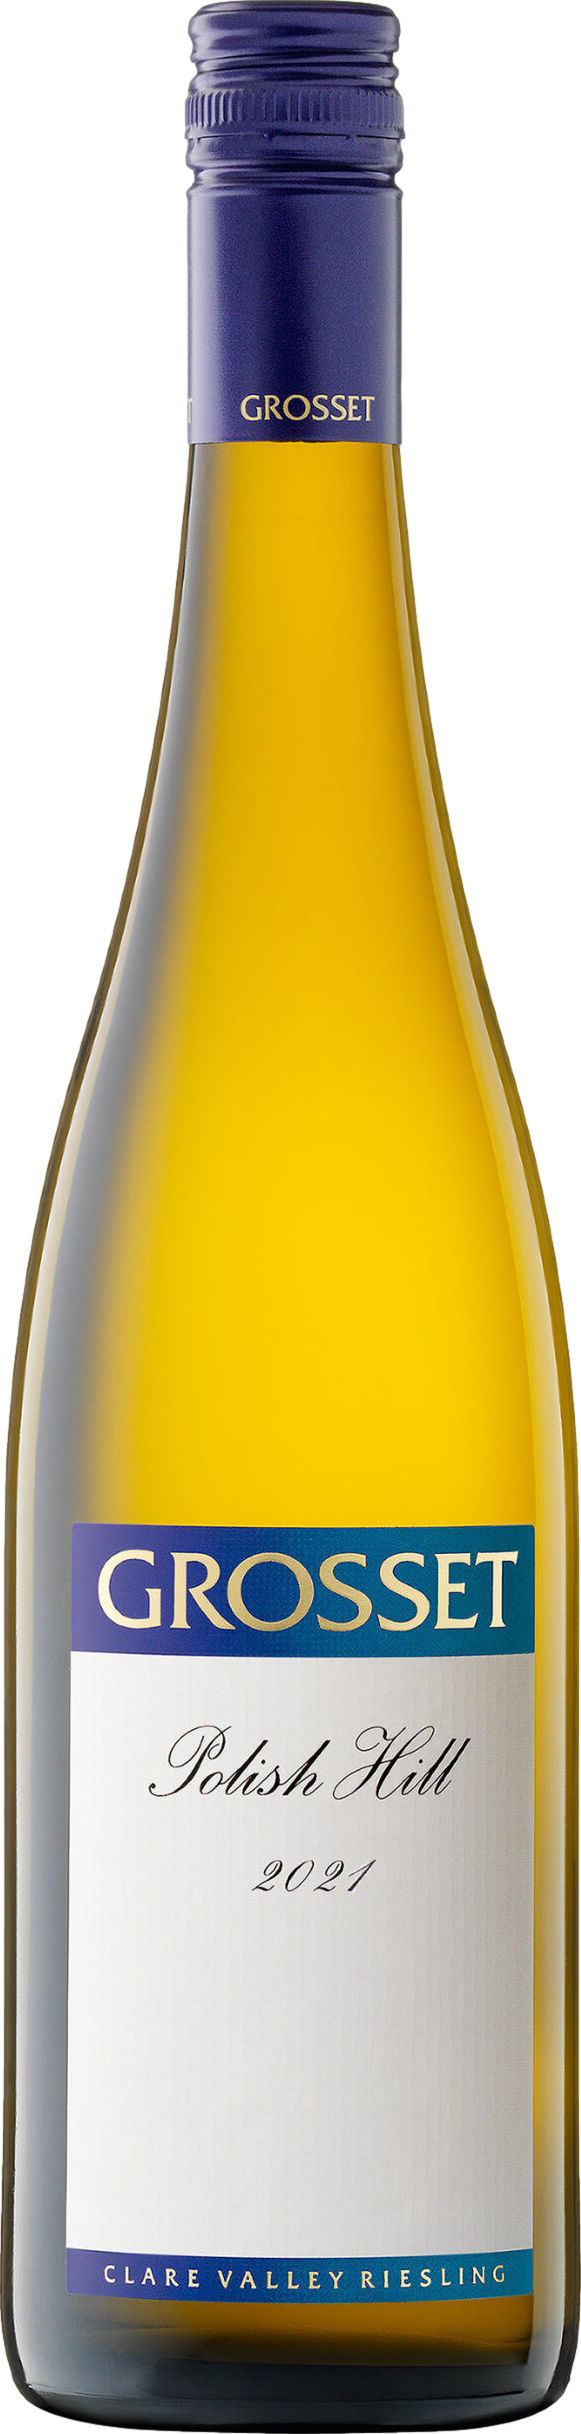 Was Now günstig Kaufen-Grosset Polish Hill Riesling 2021. Grosset Polish Hill Riesling 2021 <![CDATA[Drink now or cellar for up to 10 years. Serve chilled.  Originally an old milk depot, Grosset is a charming small family-run winery in South Australia’s Clare Valley that was 